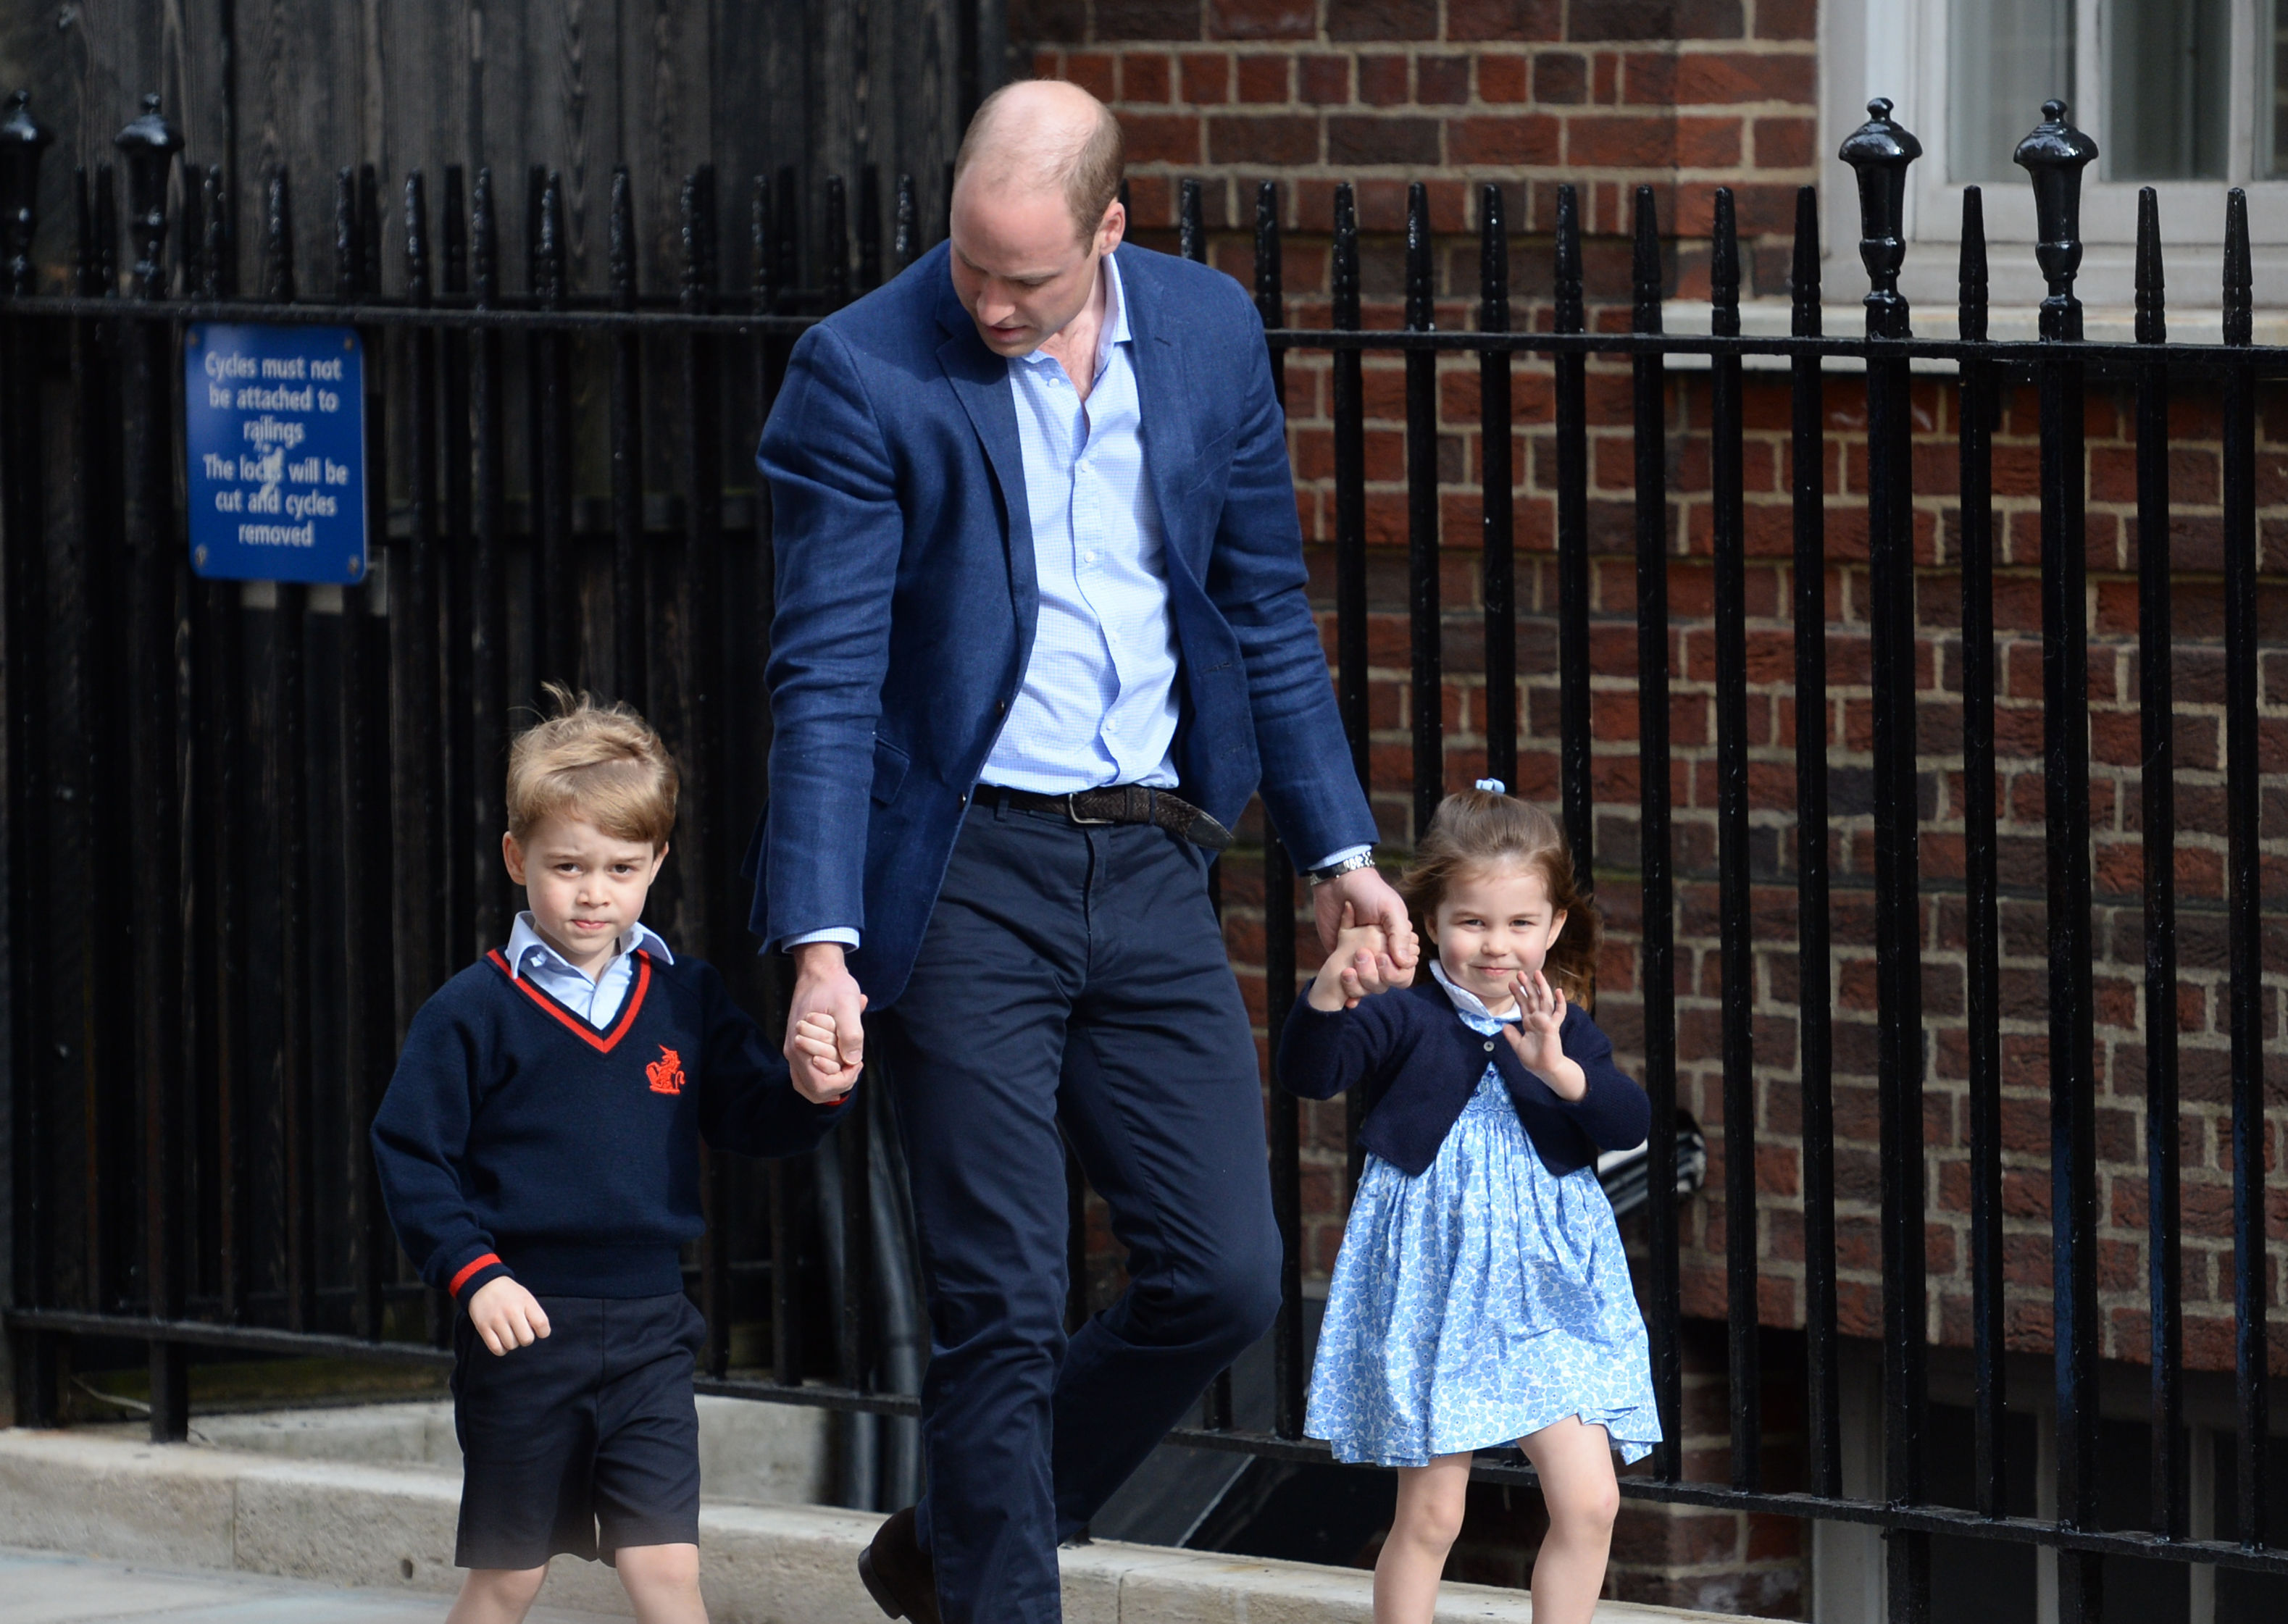 The Duke of Cambridge with Prince George and Princess Charlotte arriving at the Lindo Wing at St Mary's Hospital